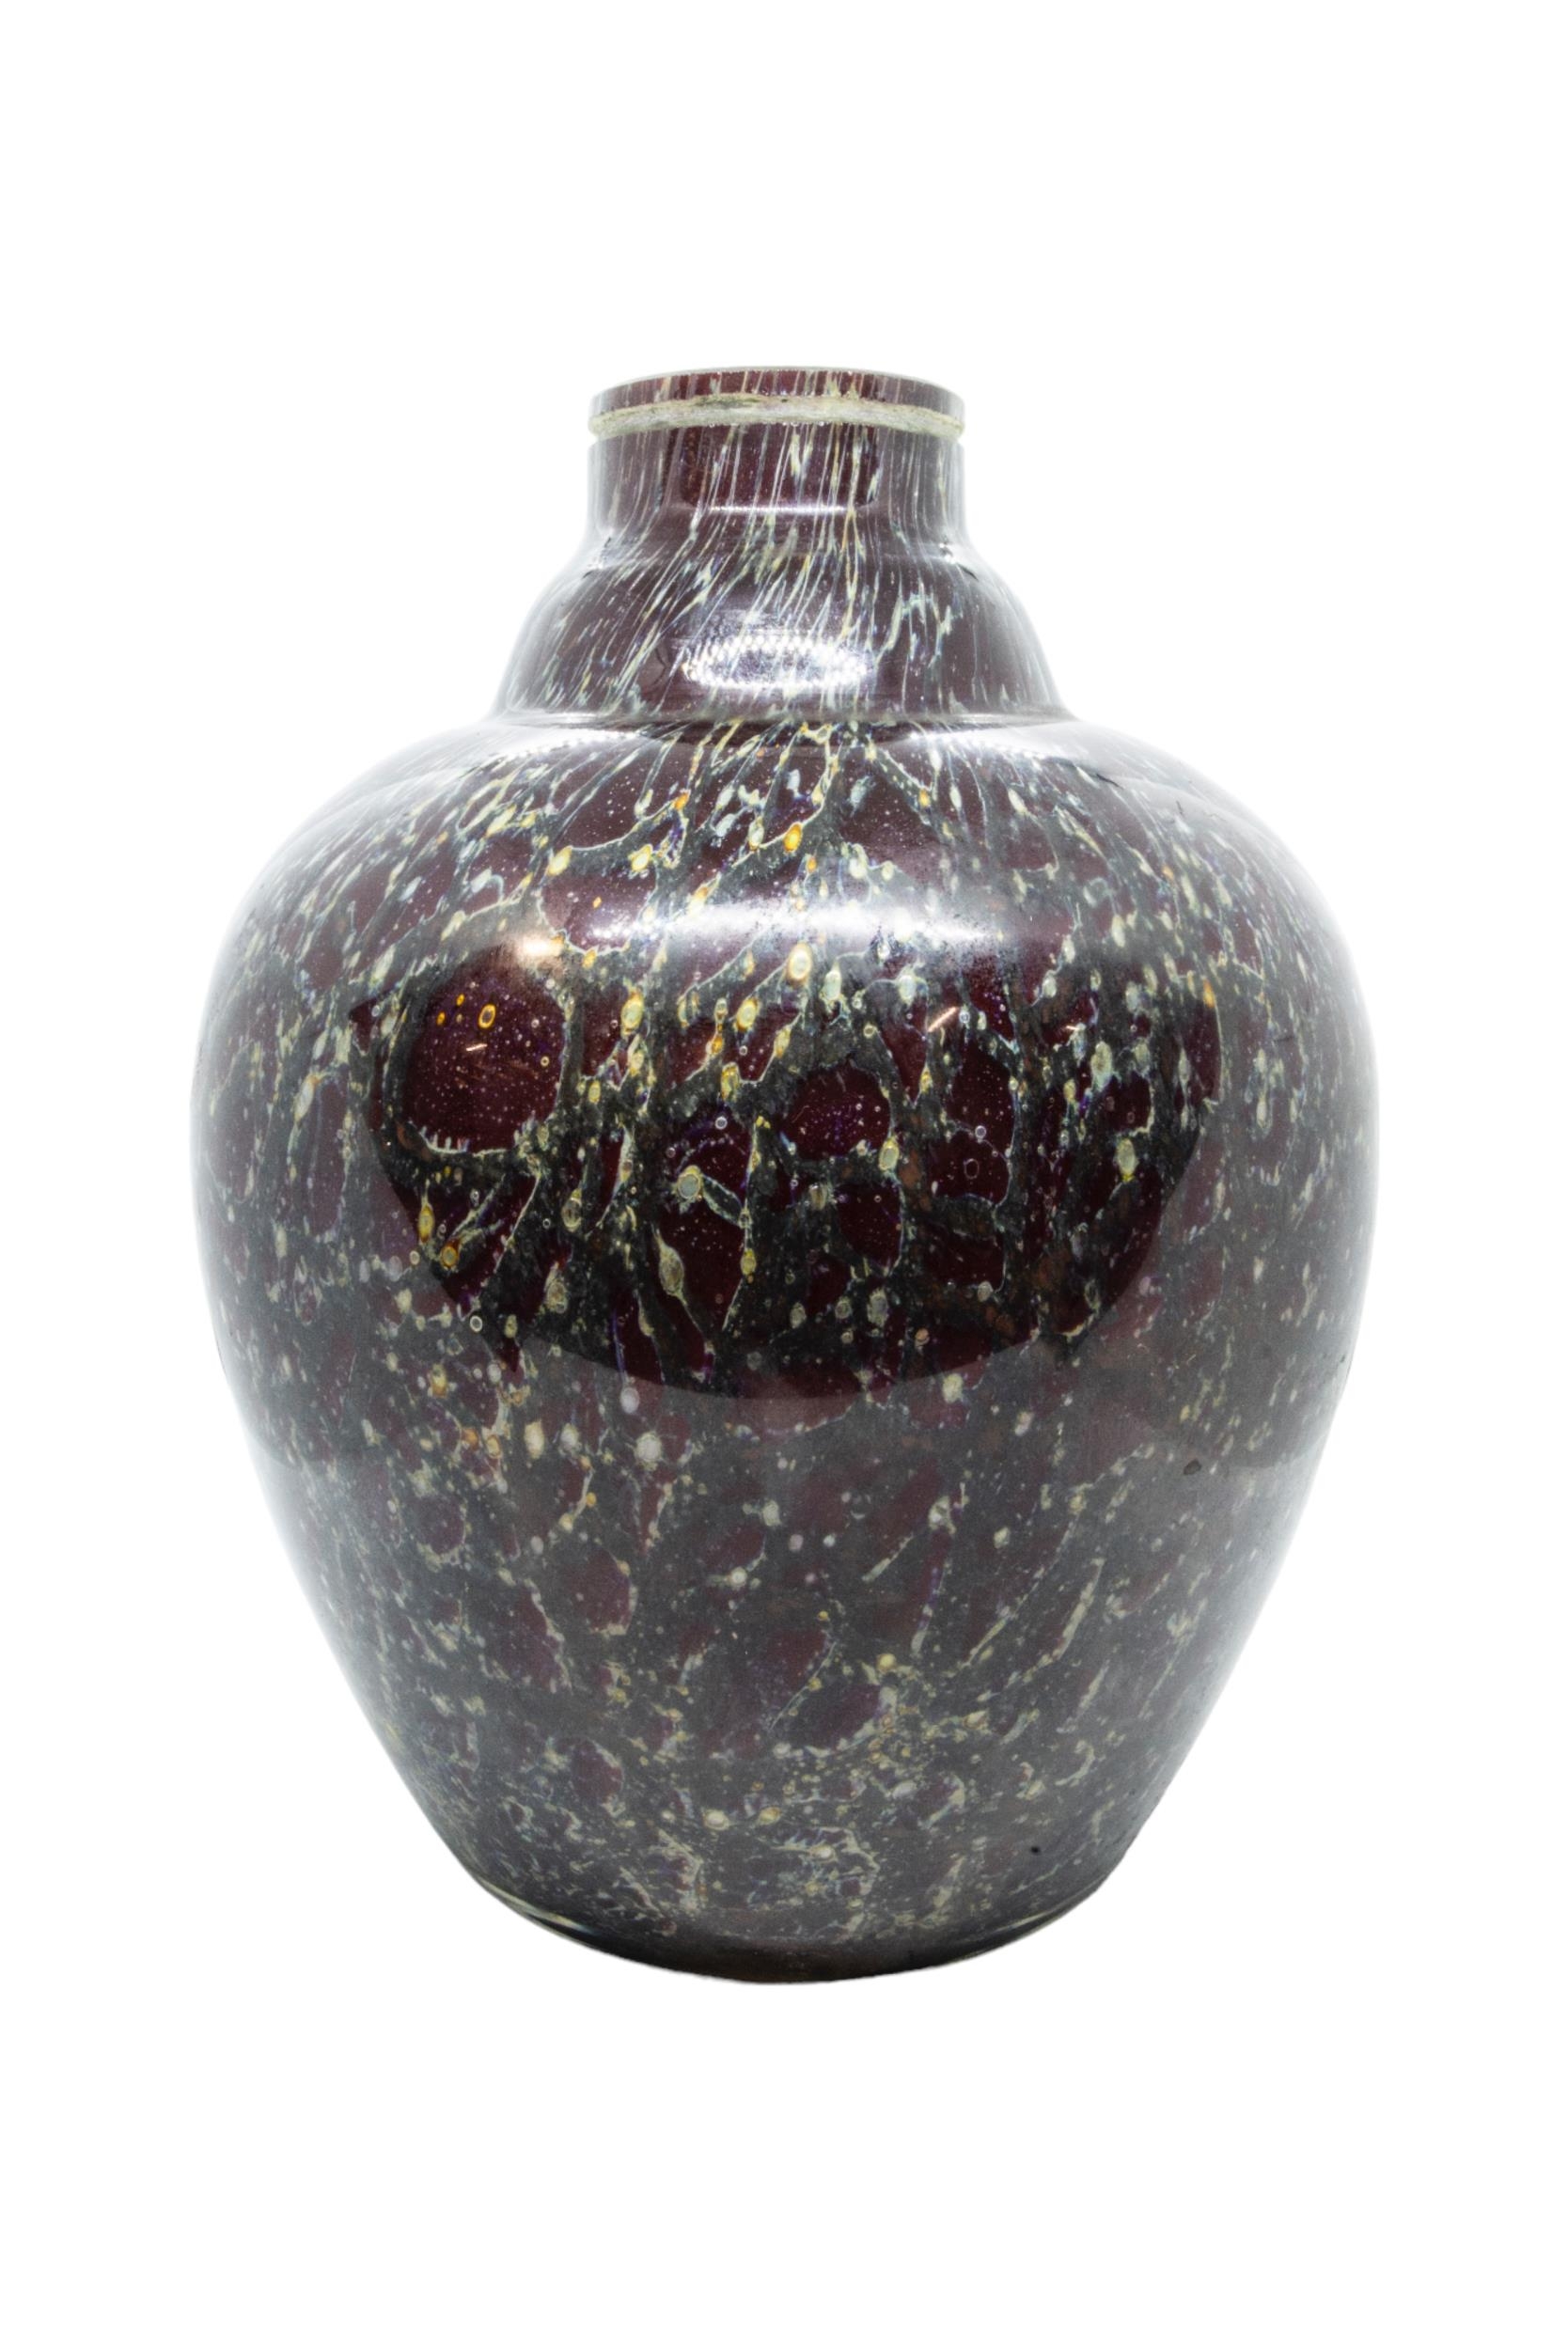 A LARGE VINTAGE BALUSTER GLASS VASE, internally decorated with a crackle effect over a rich - Image 2 of 2